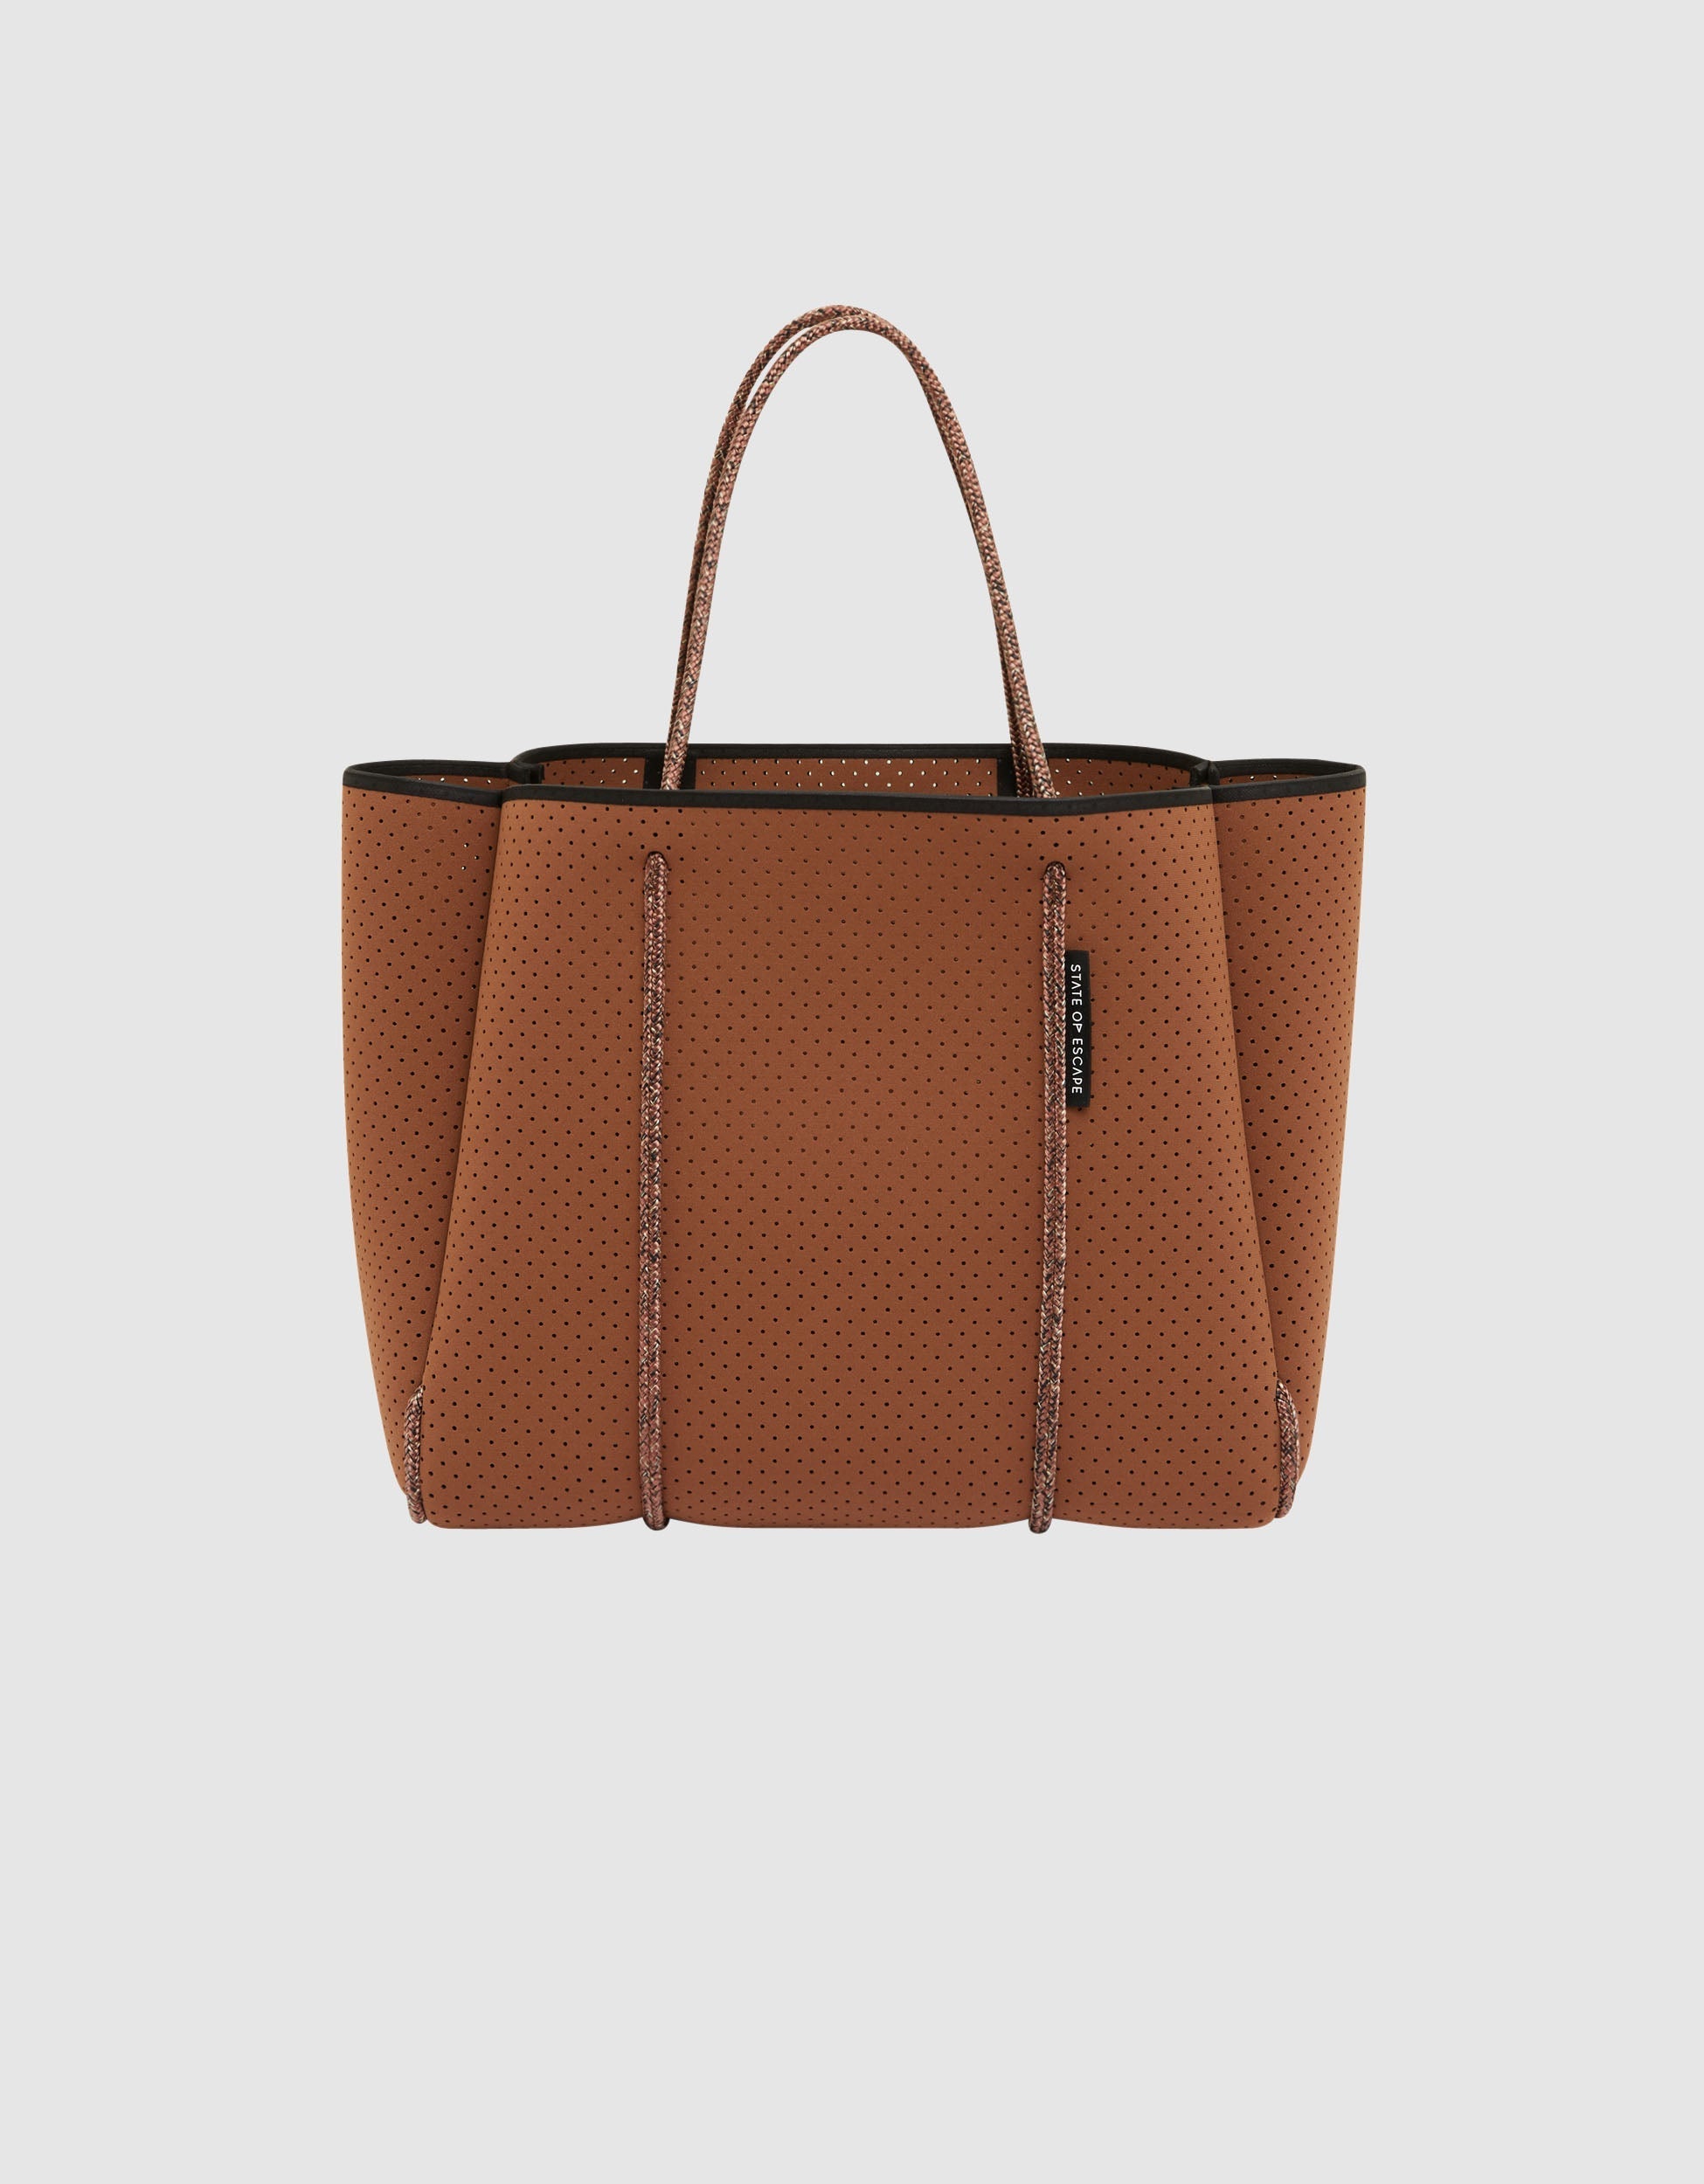 Flying Solo tote in saddle – State of Escape